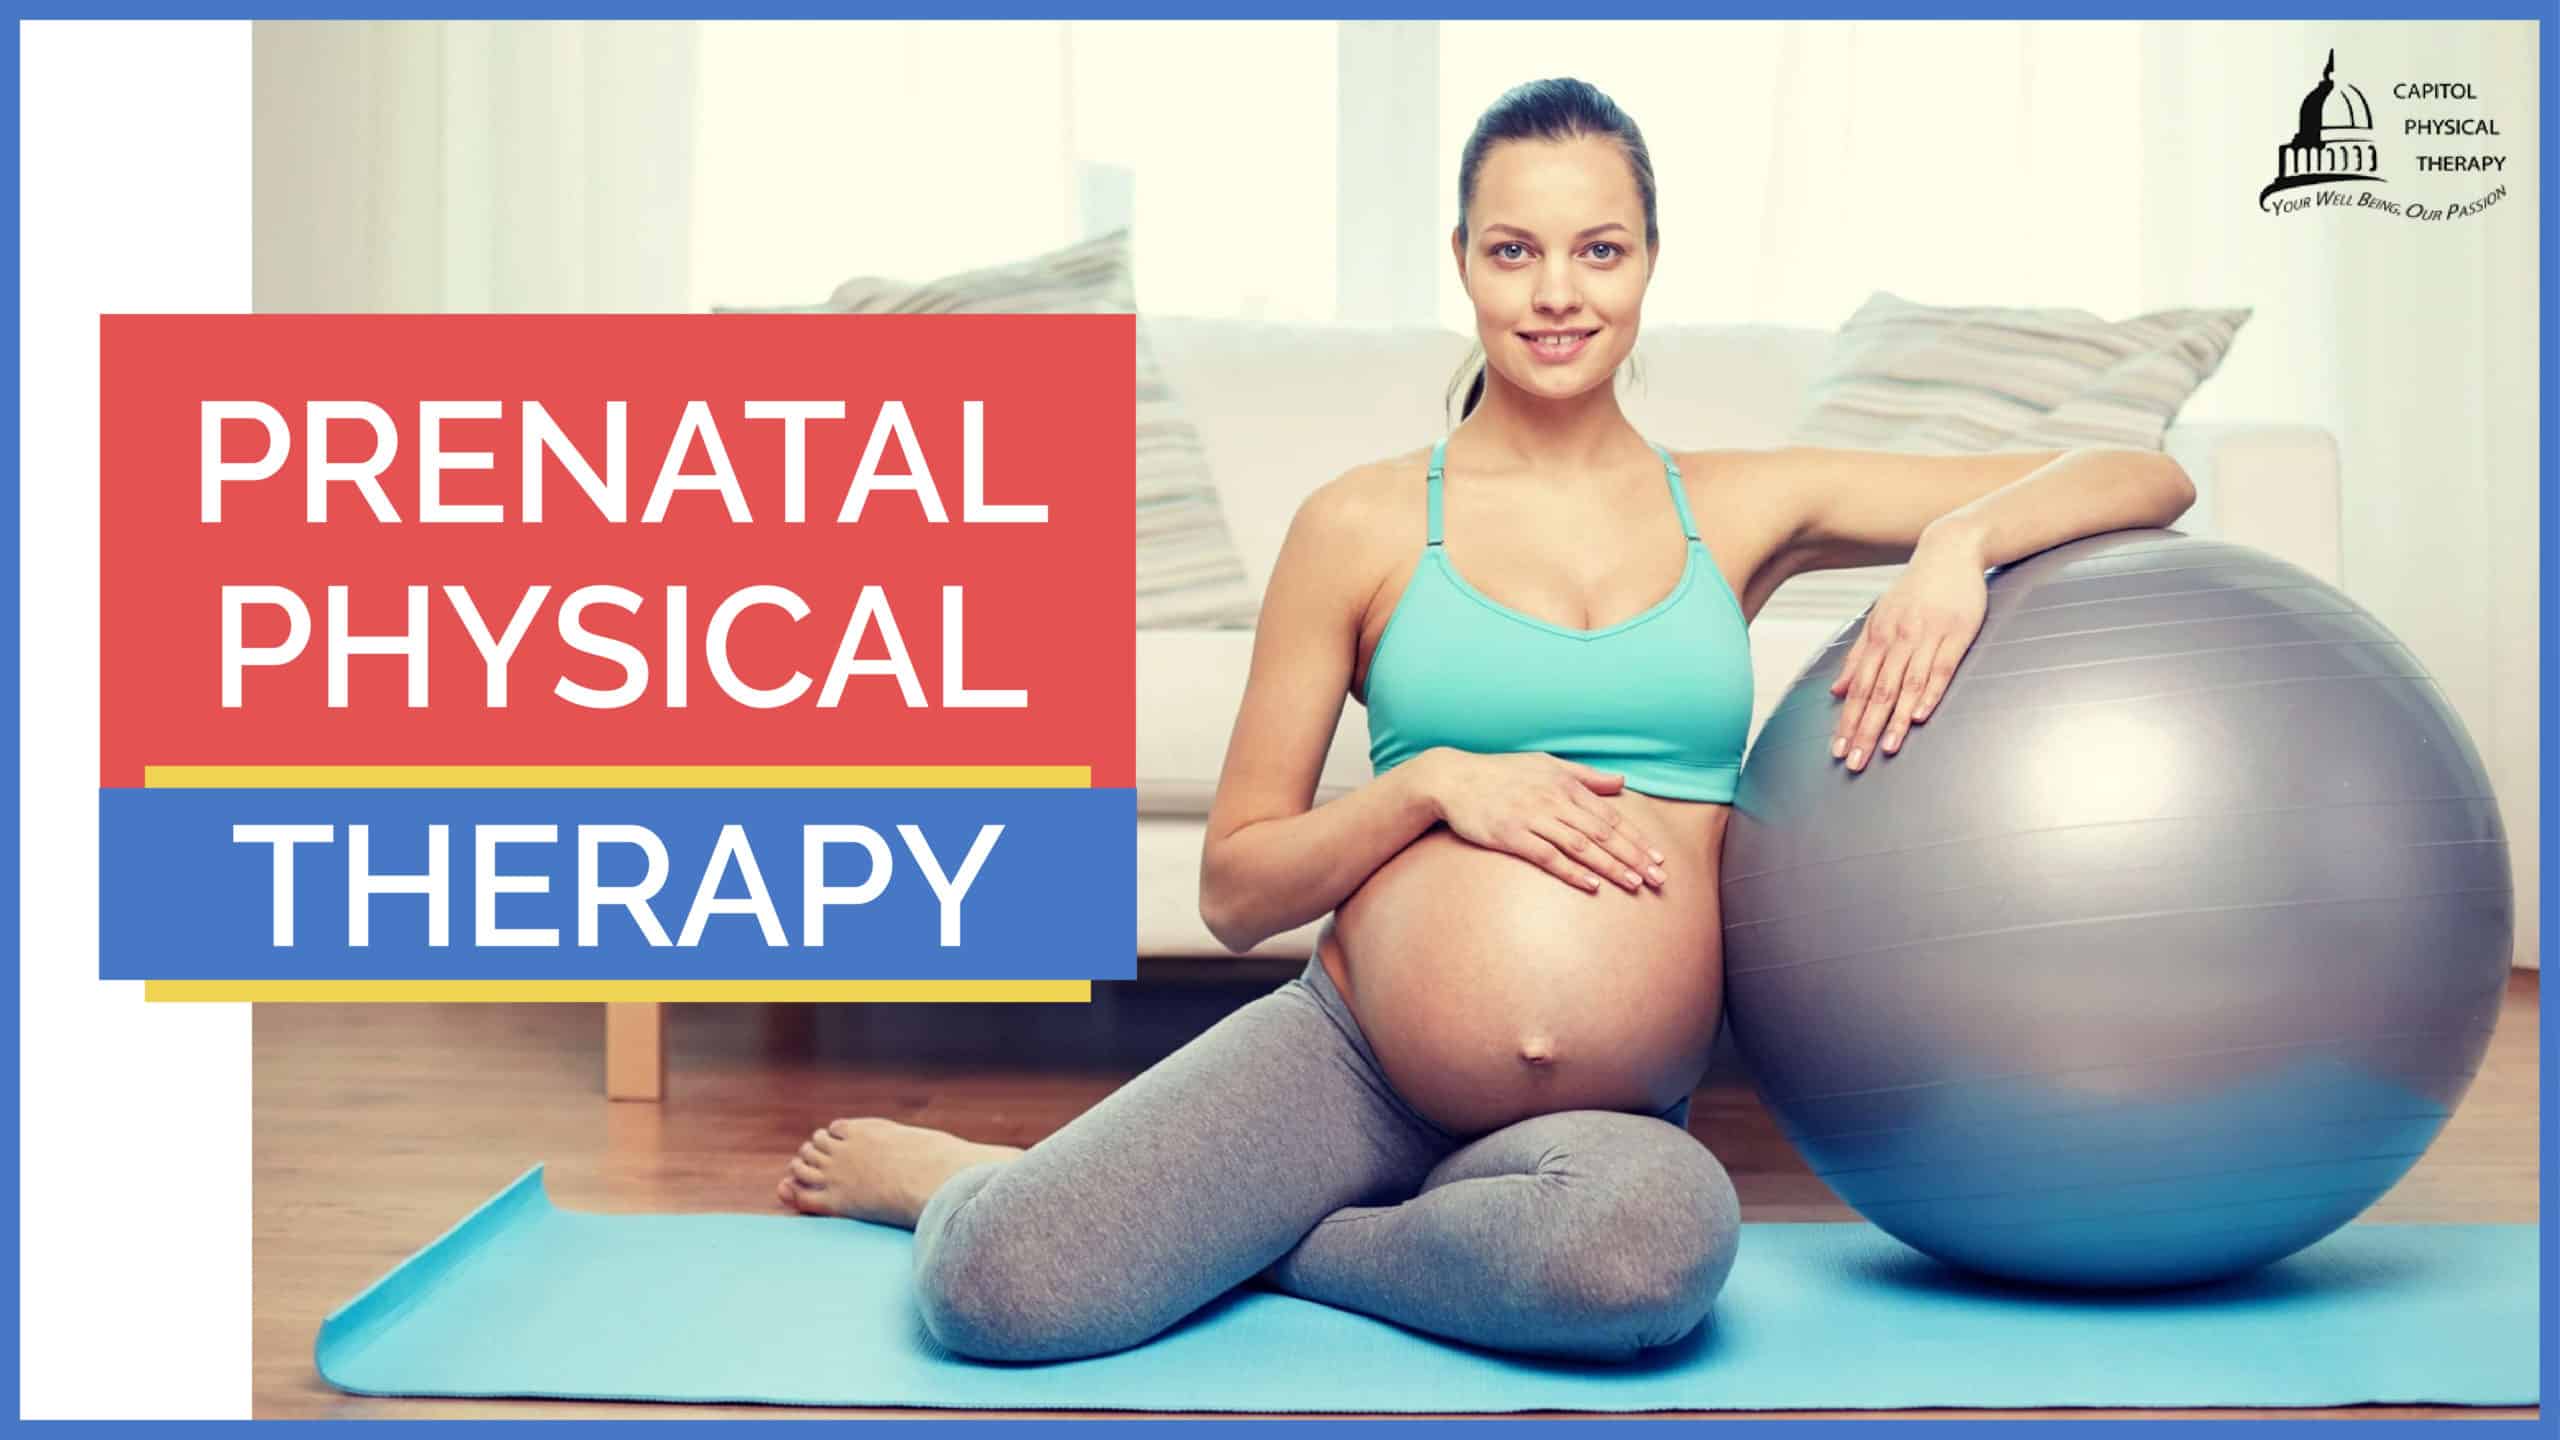 Pre-Natal Physical Therapy Solutions | Capitol Physical Therapy Washington DC | Pain & Injury Management